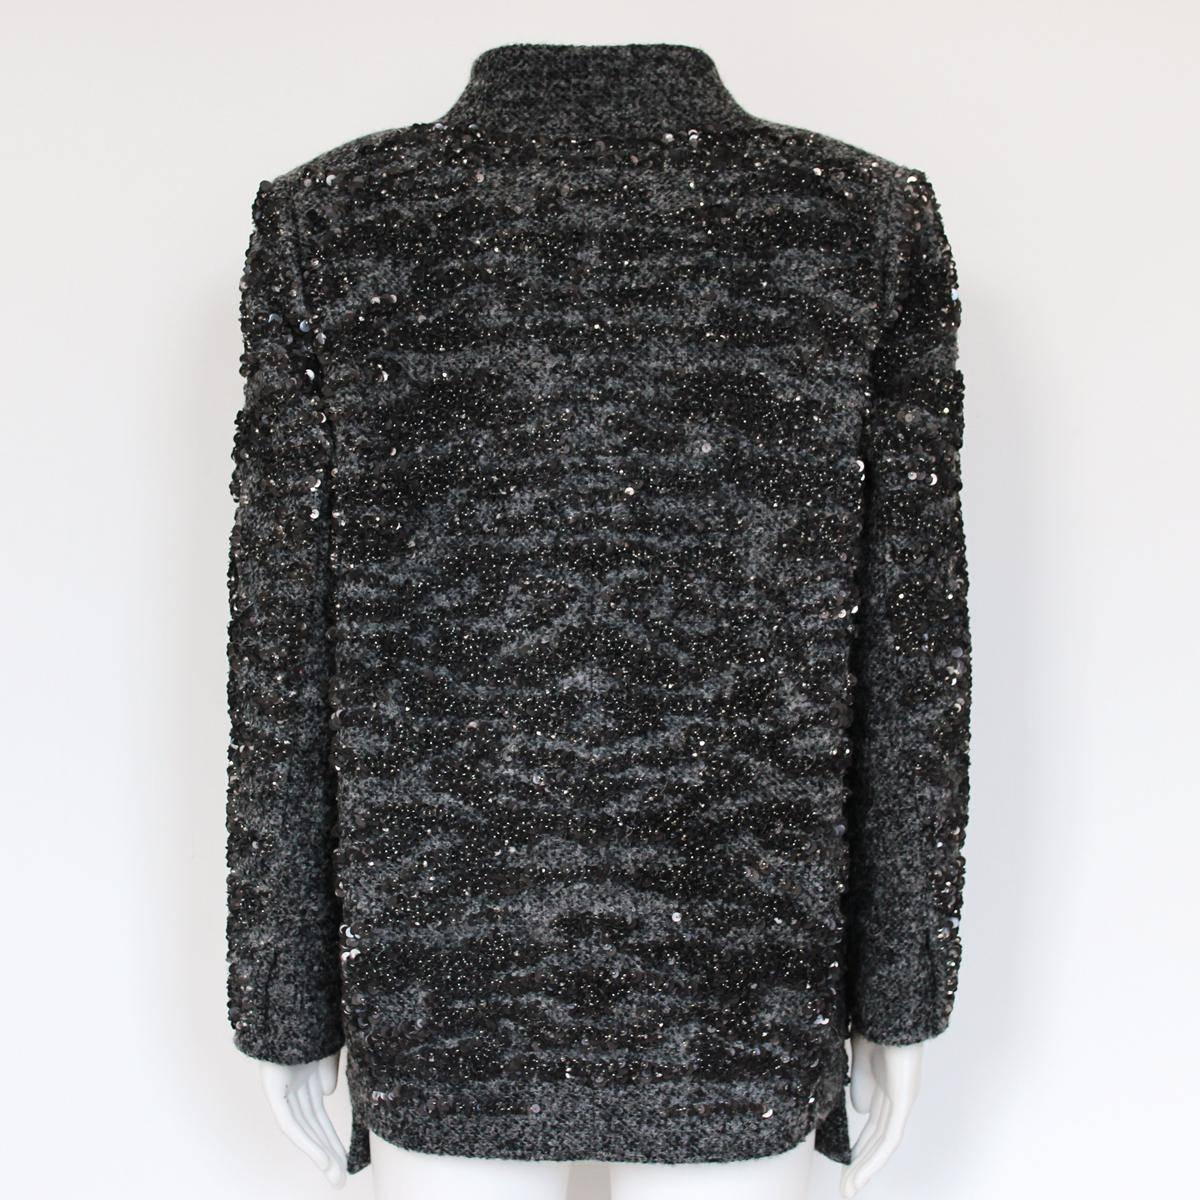 Fantastic jacket by Isabel Marant
Alpaca wool
Grey color
Embroideres sequins
Single button
2 Pockets
Total length from shoulder cm 70 (27.5 inches)
Total weight 1.9 kgs / 4.1 pounds
Worldwide express shipping included in the price !